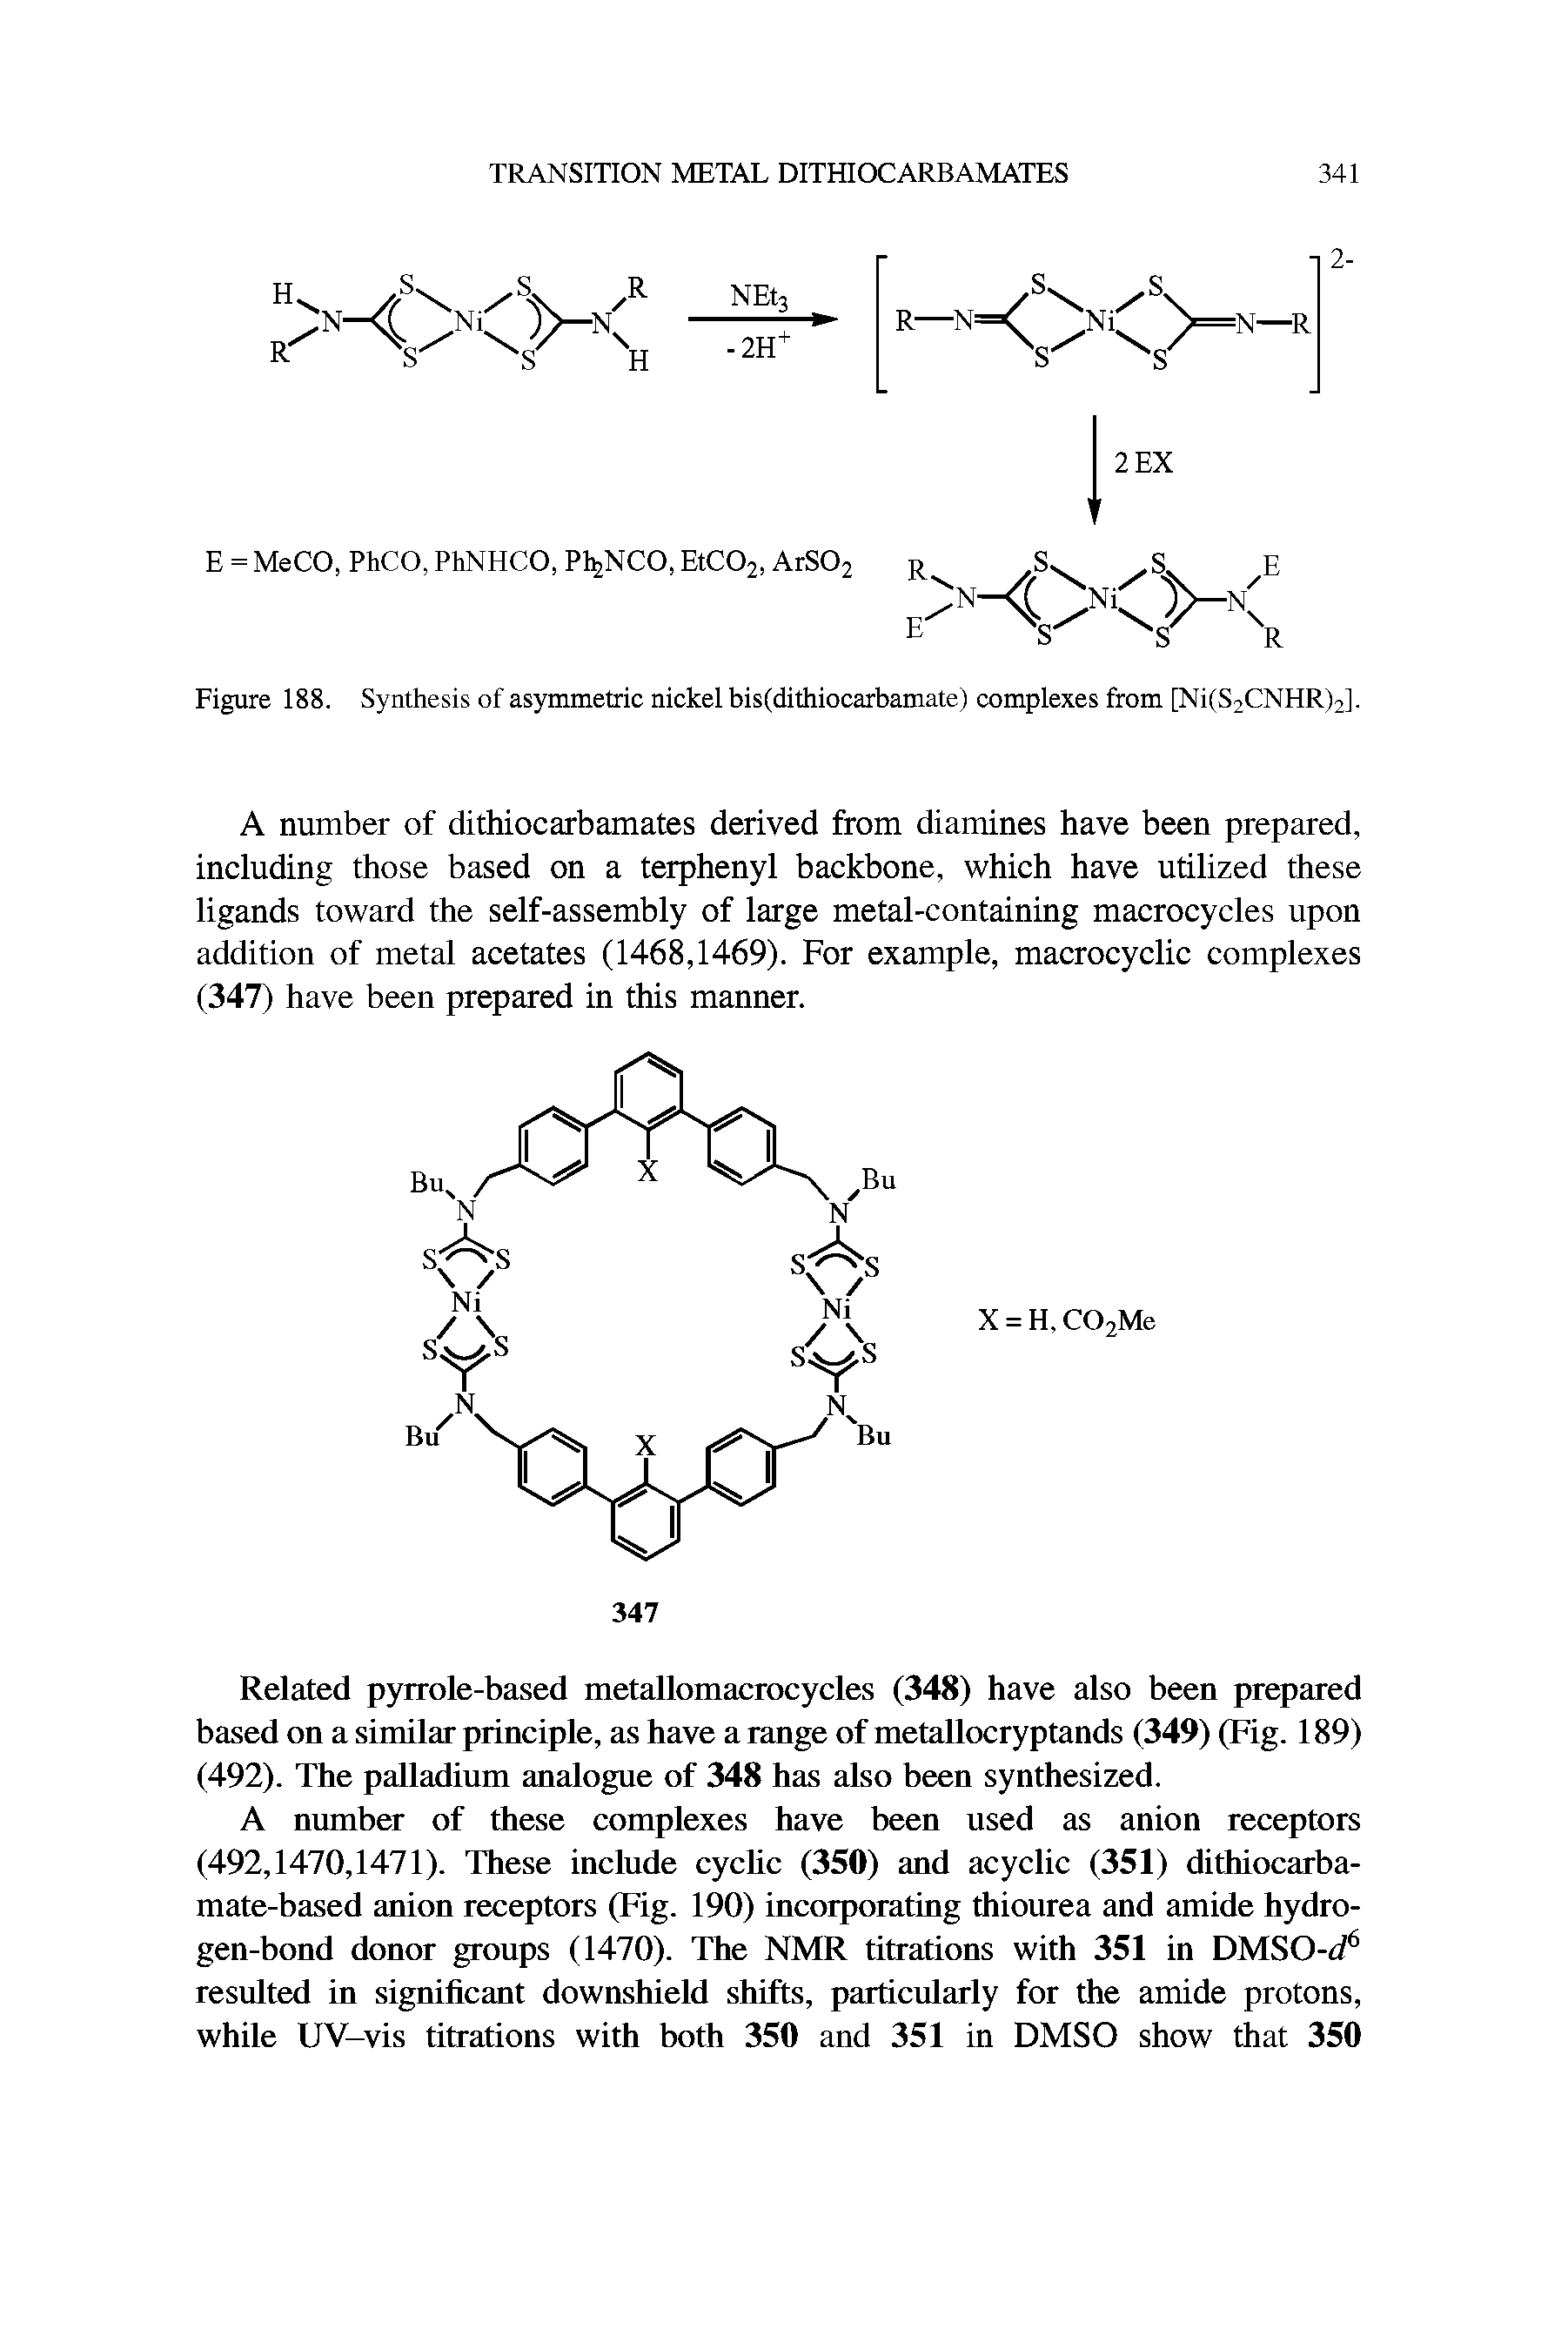 Figure 188. Synthesis of asymmetric nickel bis(dithiocarbamate) complexes ftom pVi(S2CNHR)2].